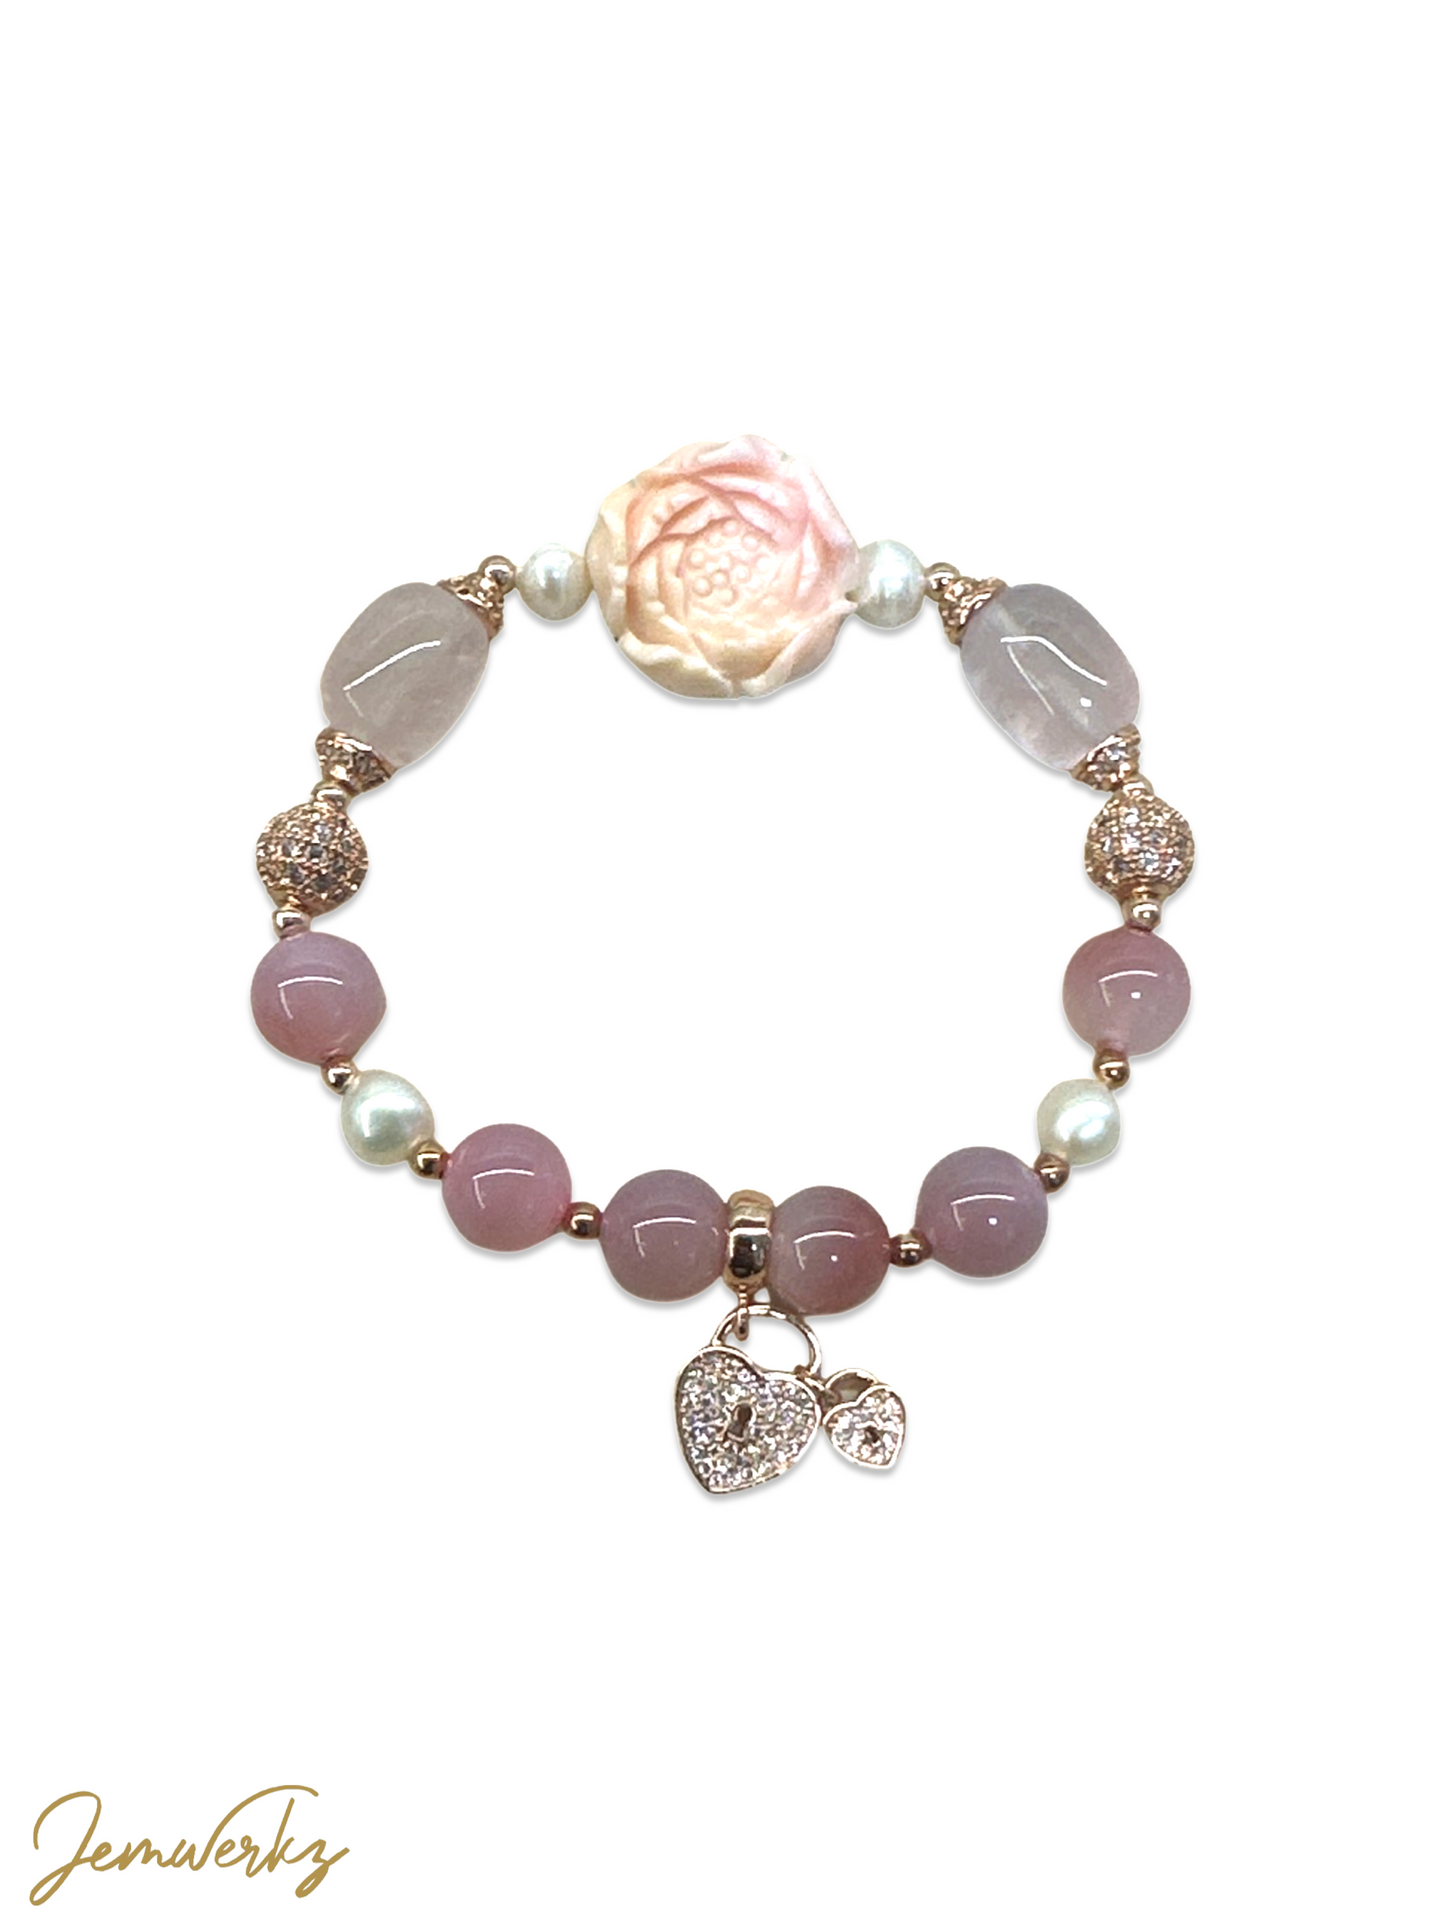 QUILLA - Queen Conch Peony , Rose Quartz Barrel, YanYuan Agate, Freshwater Pearls and Heart Charm Bracelet